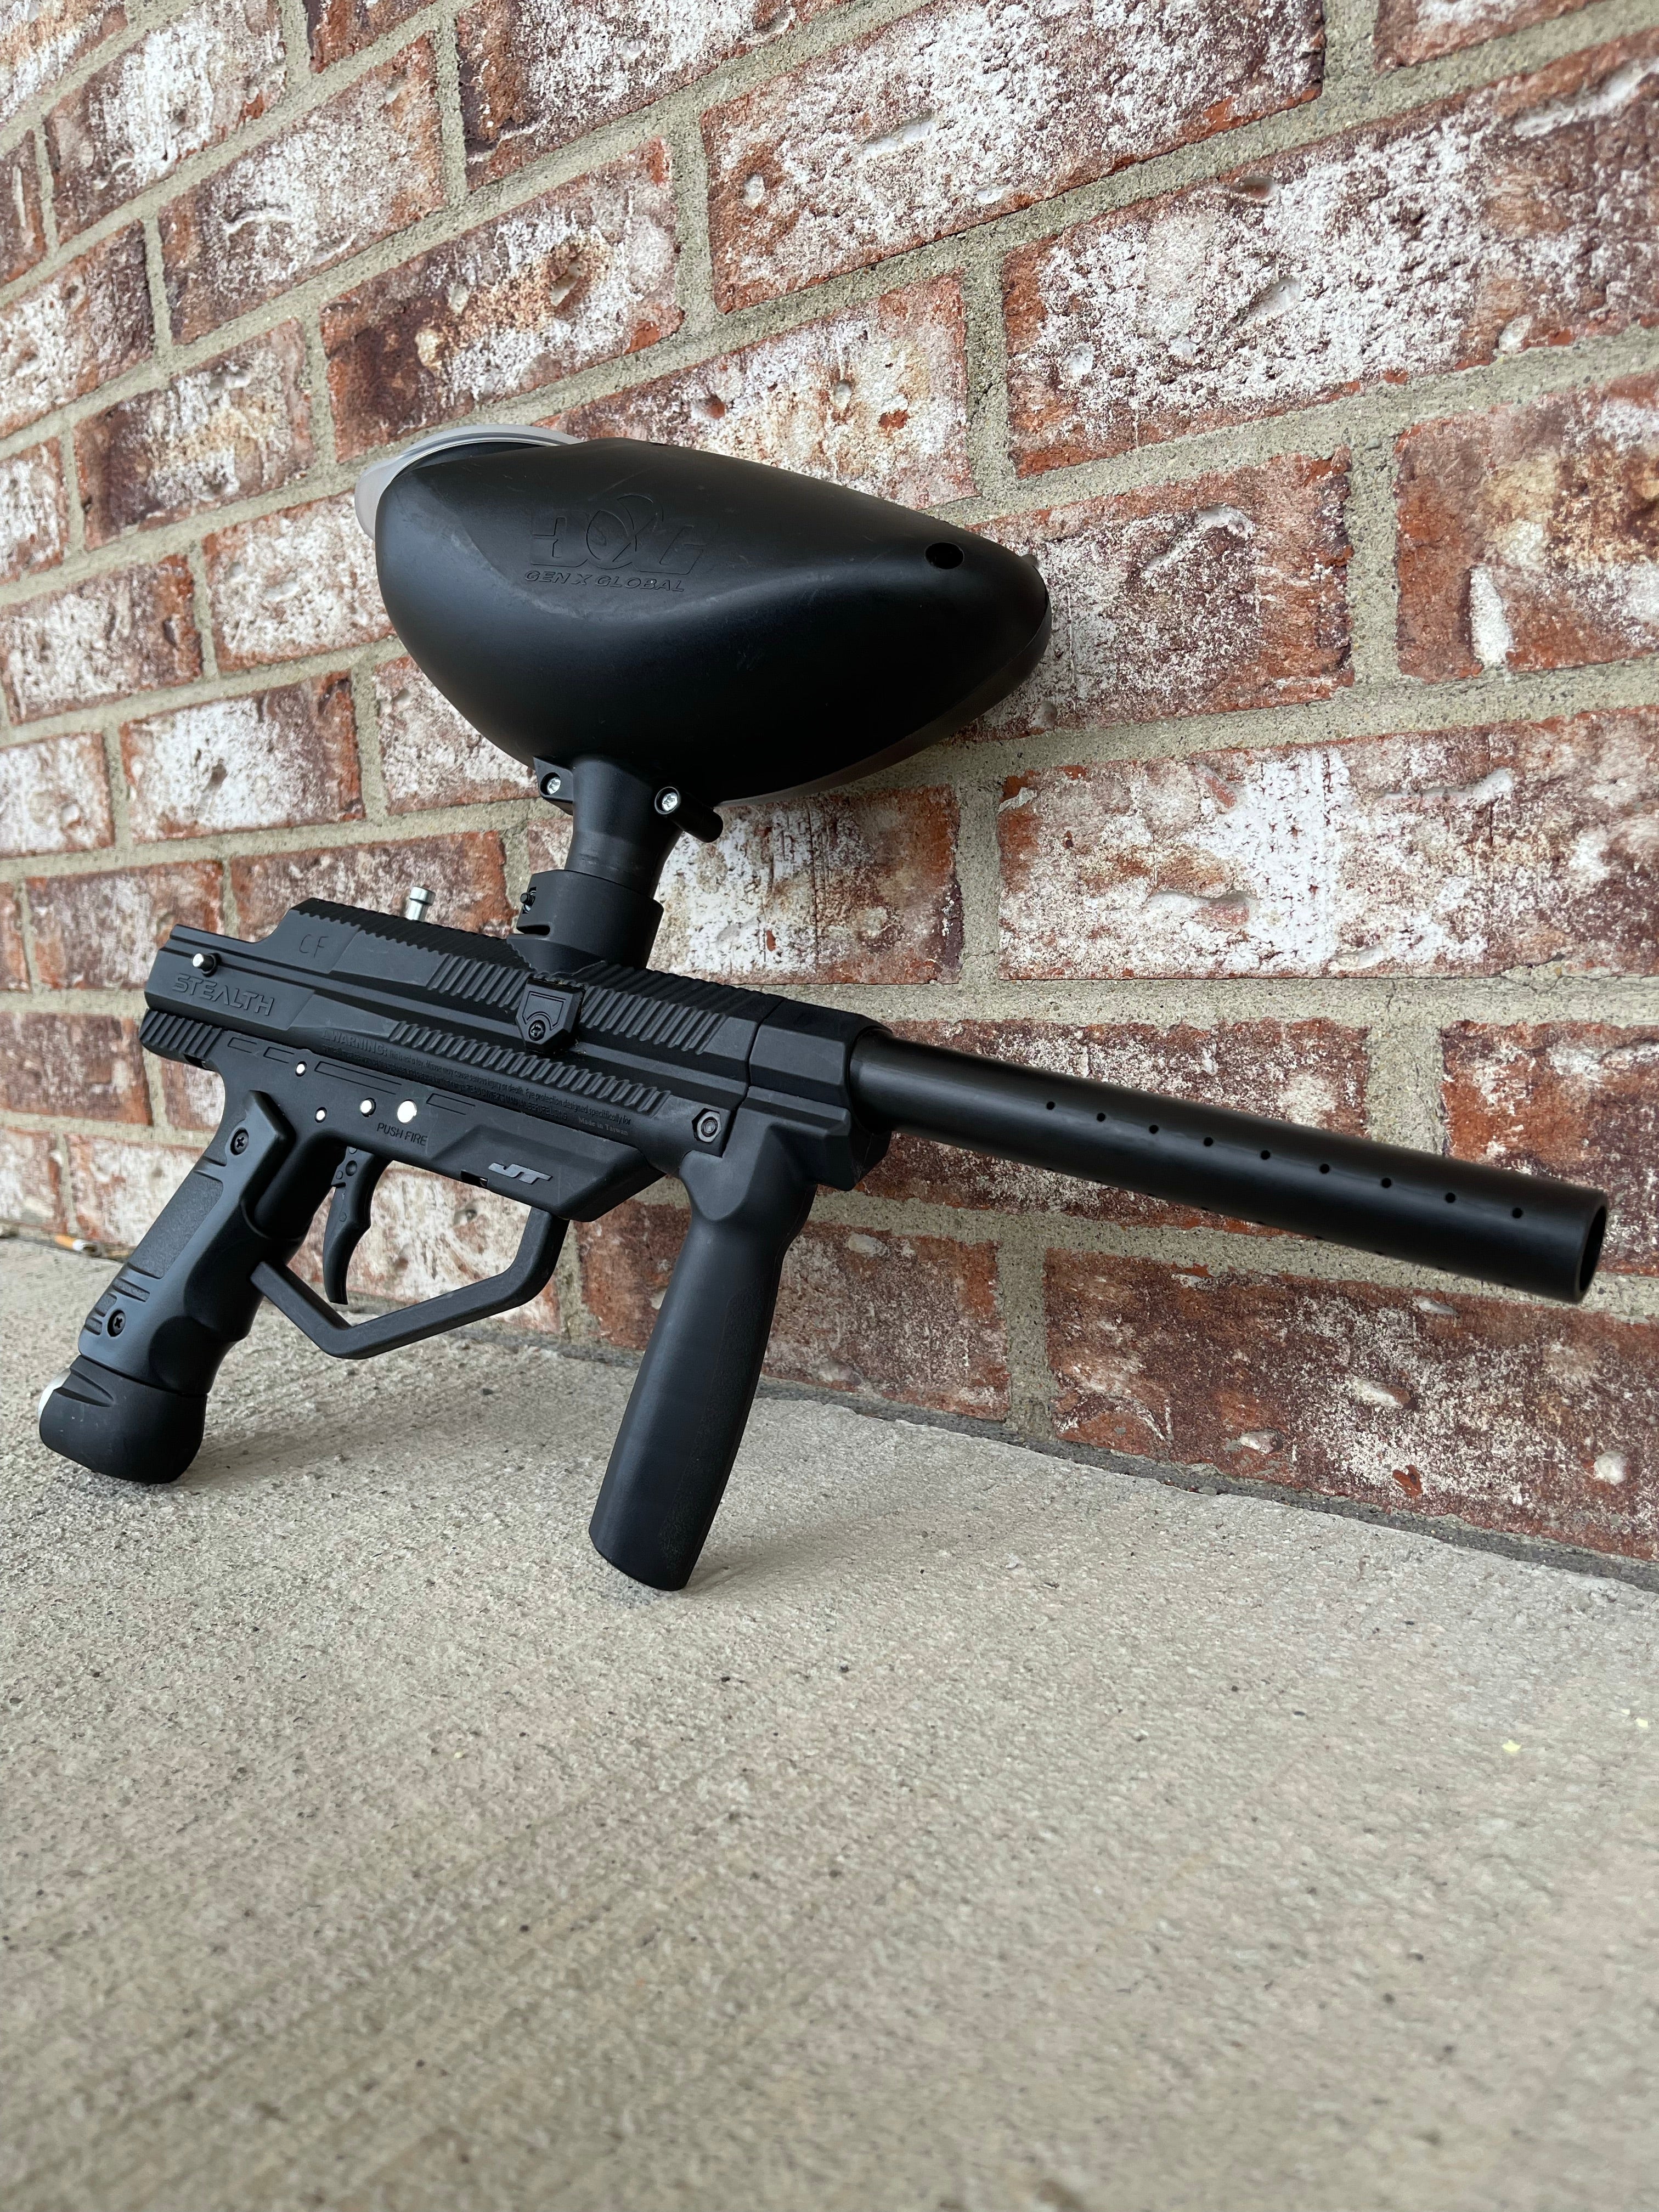 Used JT Stealth Paintball Marker - Black